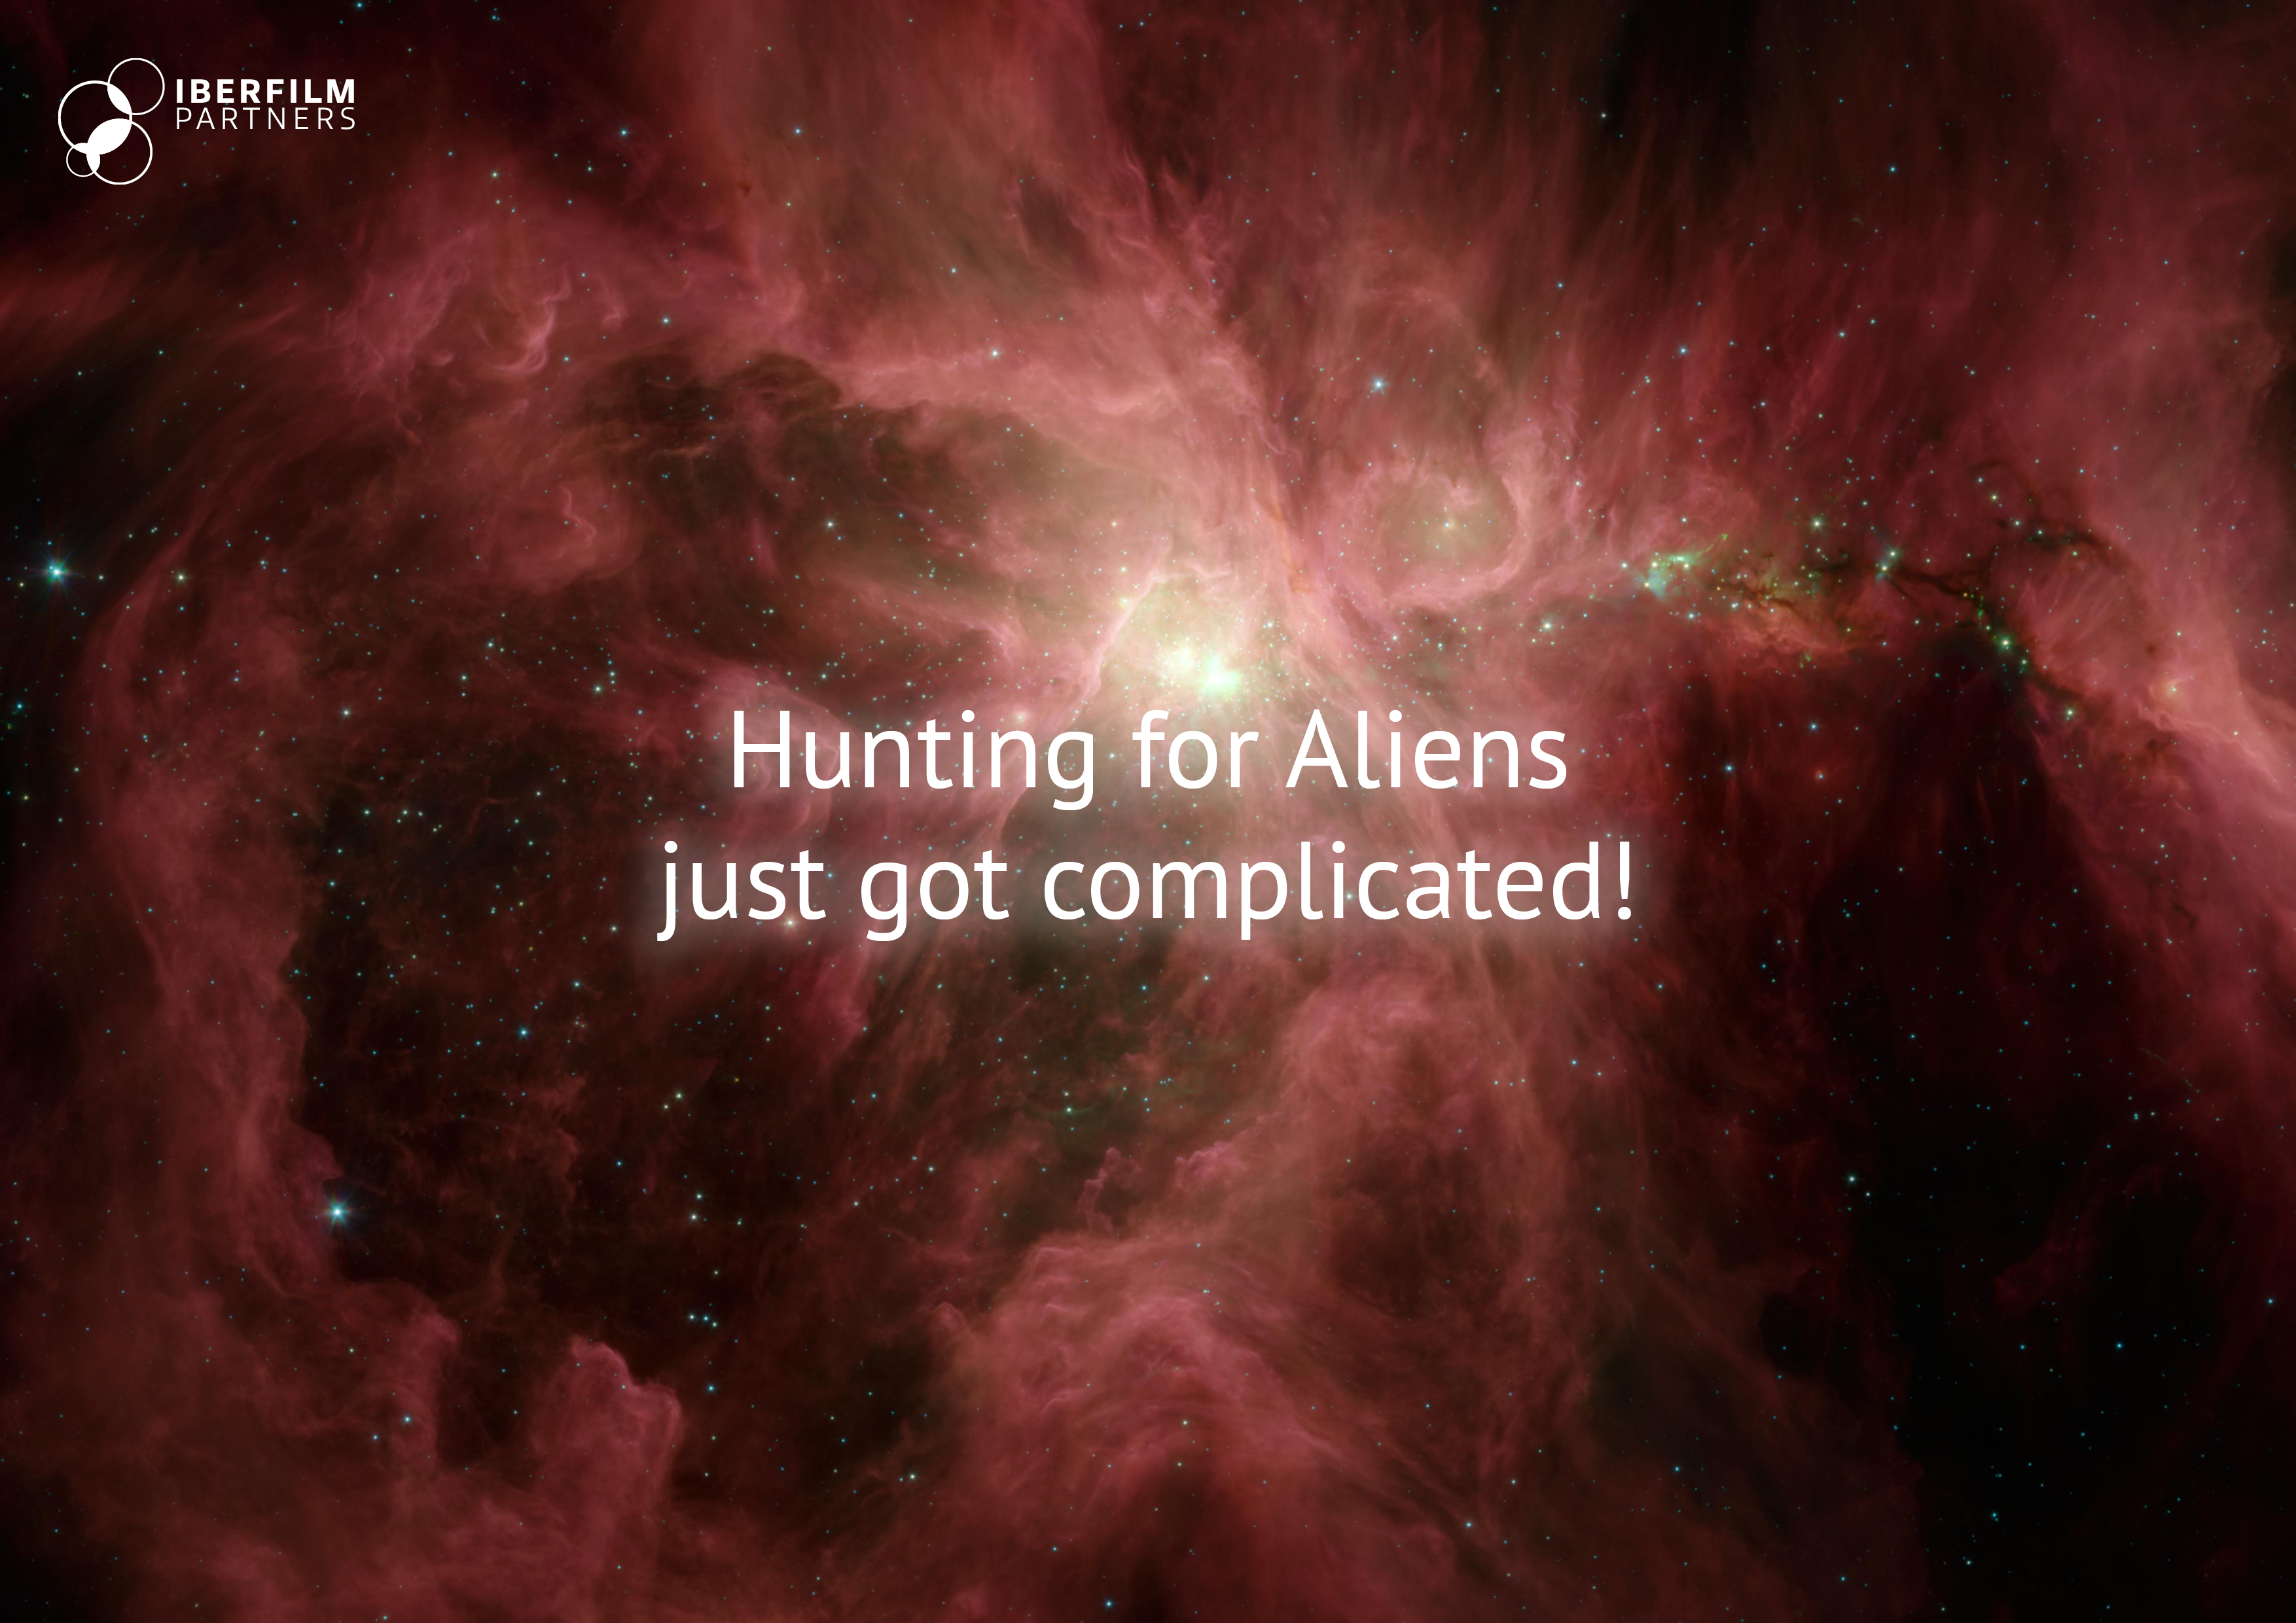 Hunting for Aliens just got complicated!